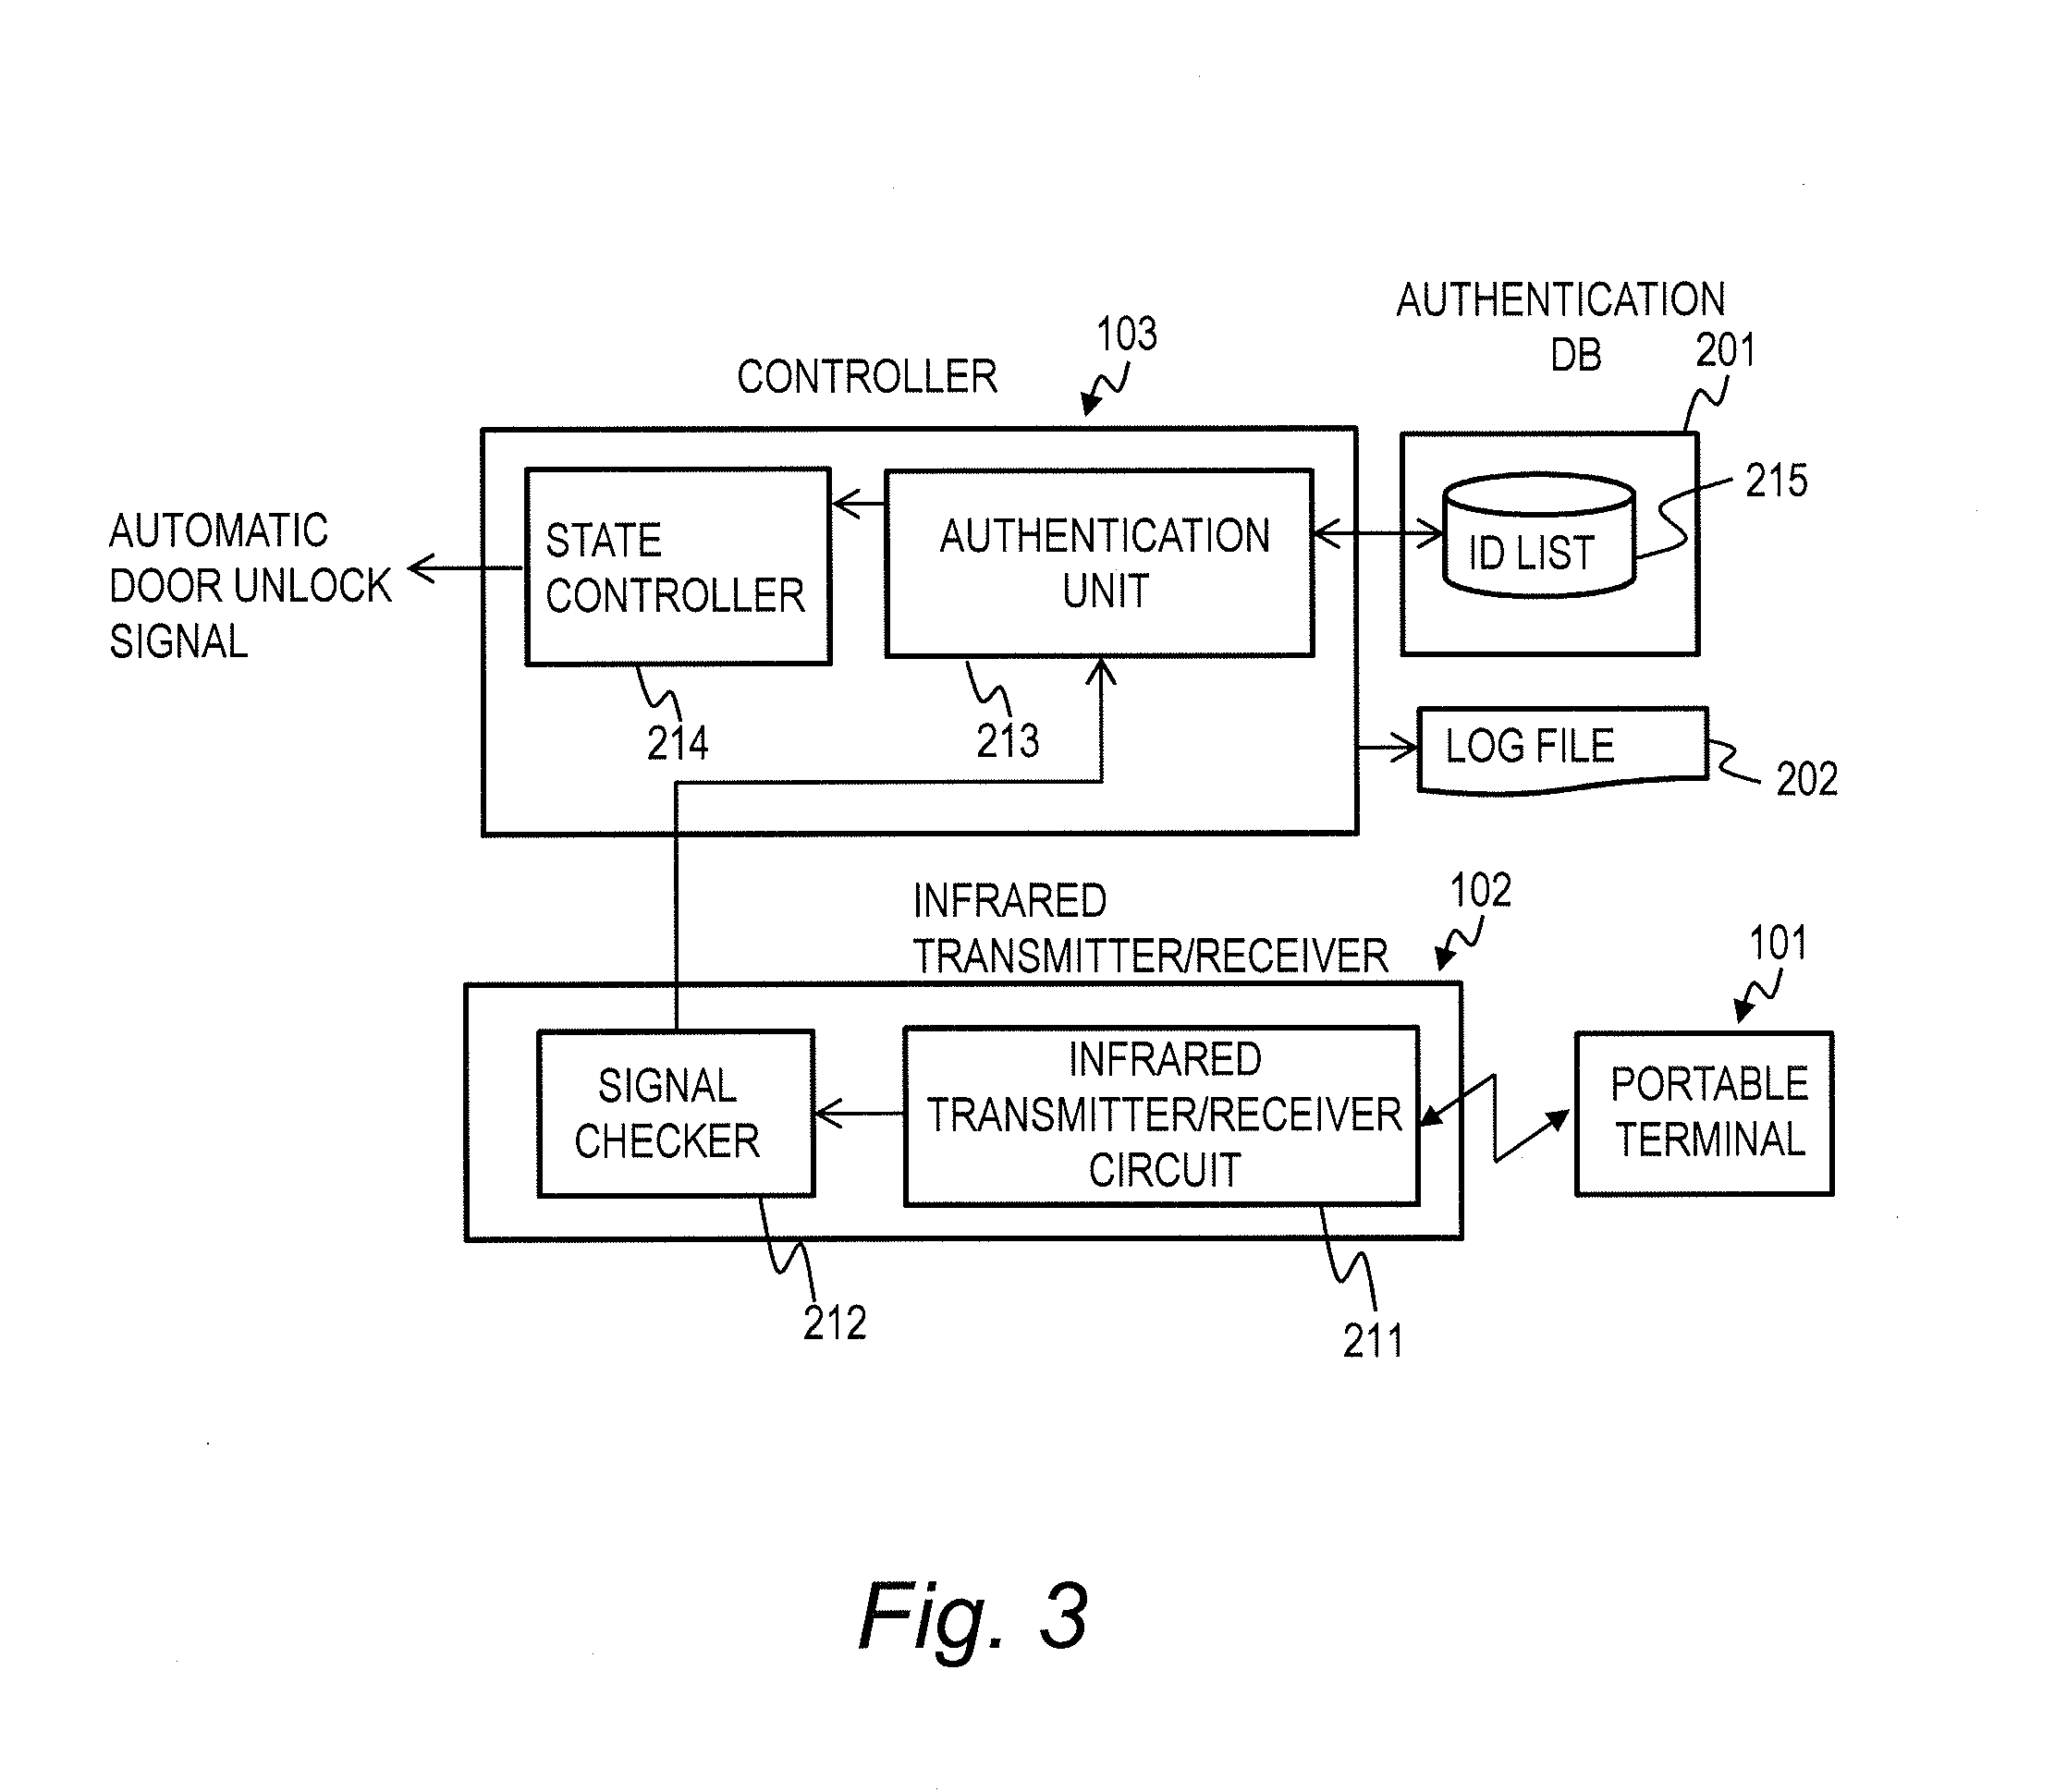 State Control System and State Control Method